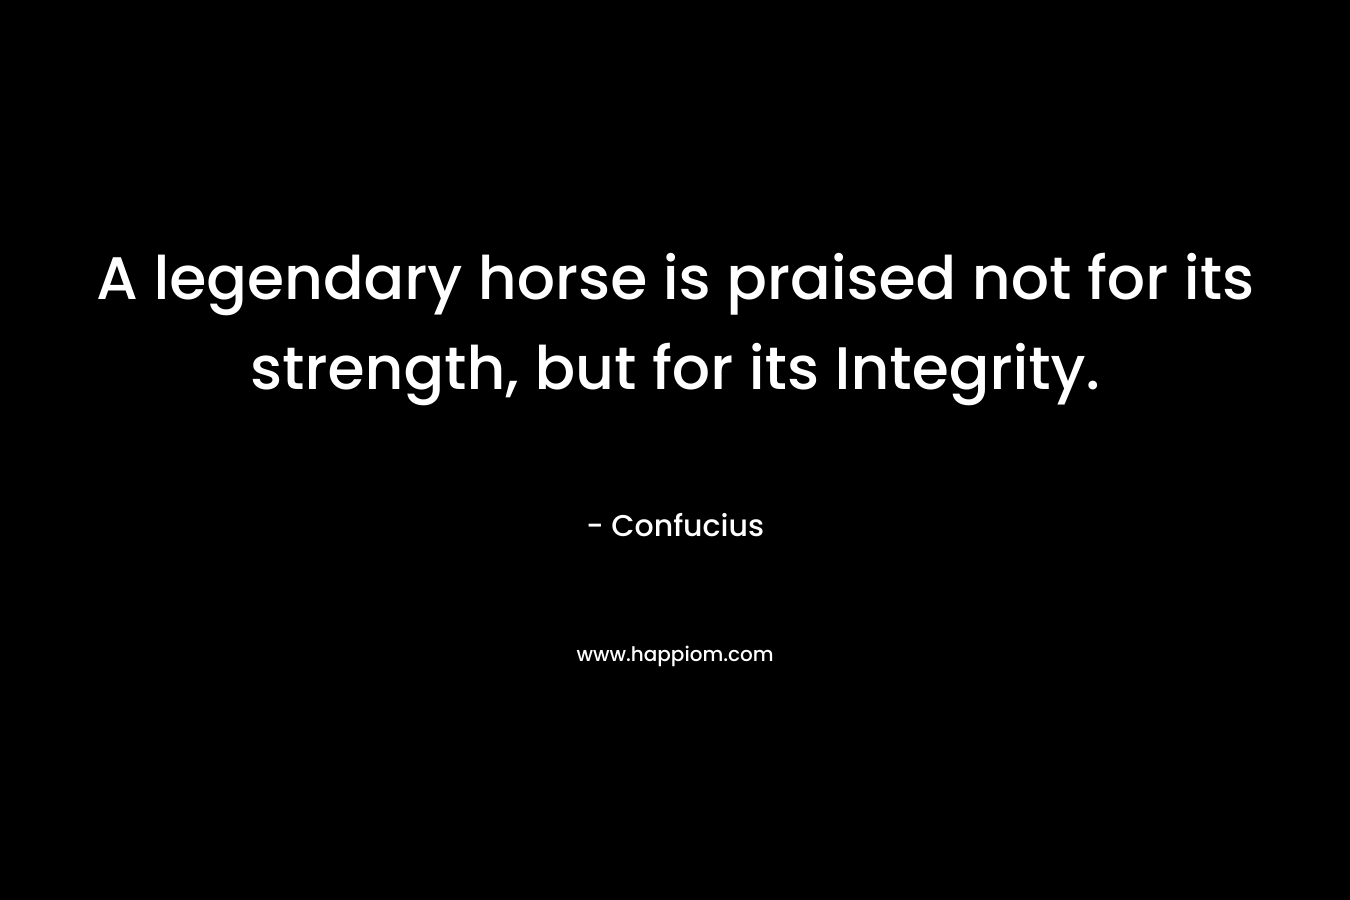 A legendary horse is praised not for its strength, but for its Integrity. – Confucius